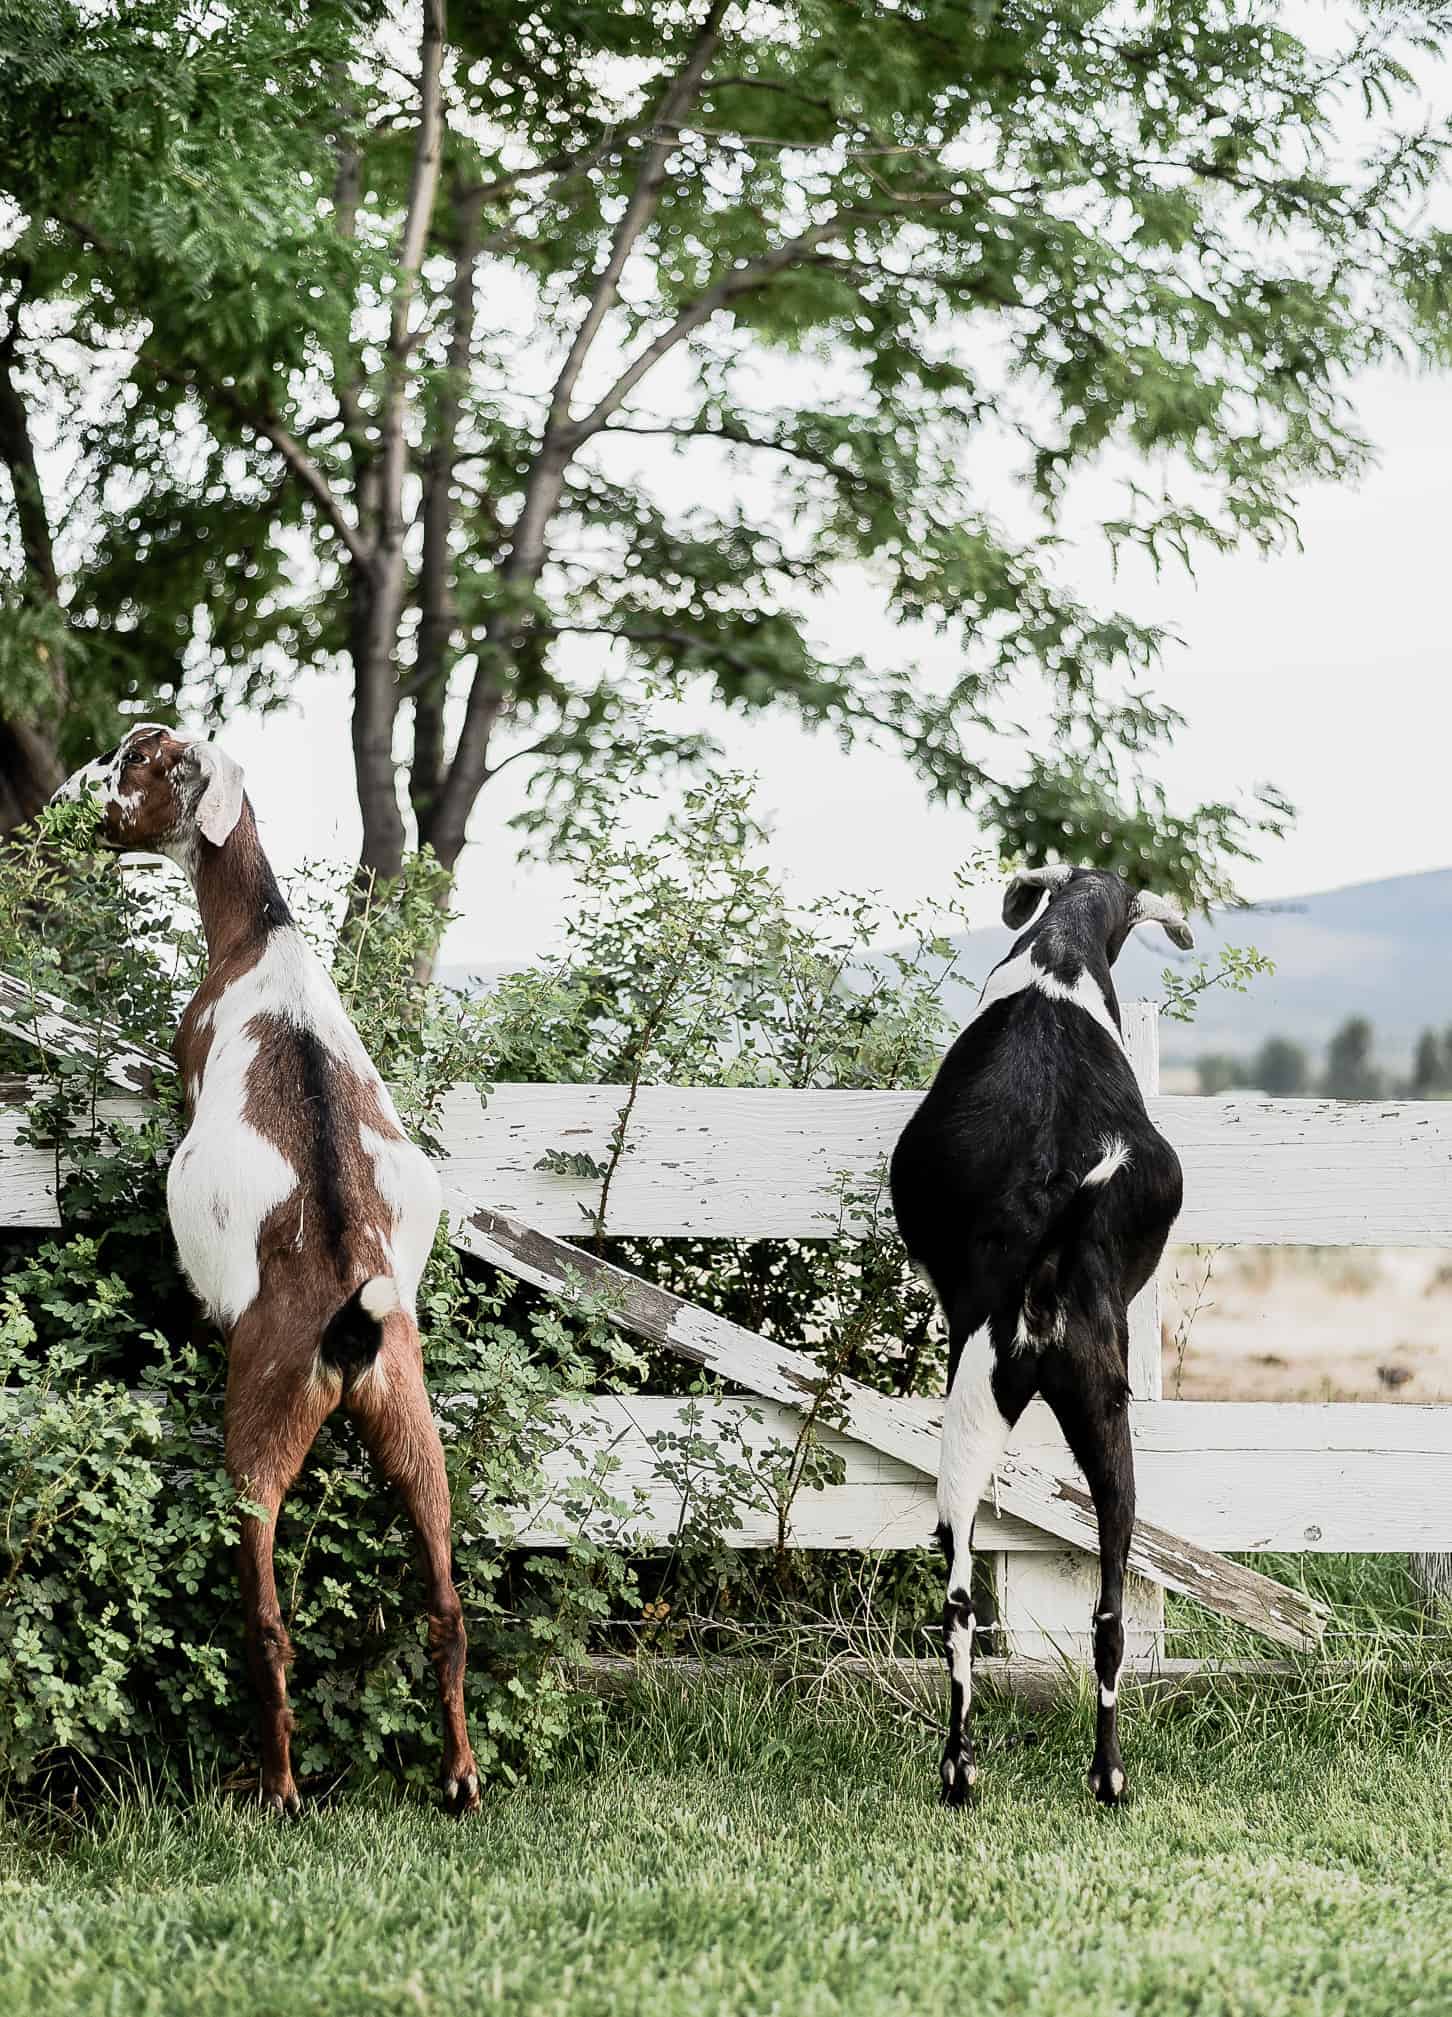 15 Things I Wish I Knew Before Getting Goats | However, it is a common misconception that goats are easy keepers - in fact, they are our most high maintenance animals. They require a close eye and lots of attention, so I thought it would be convenient to compile a list of things I wish I knew before we got goats - if you're considering getting goats, please, learn from my mistakes!  #goatcare #goats #goatlife #ranchlife #boxwoodavenue